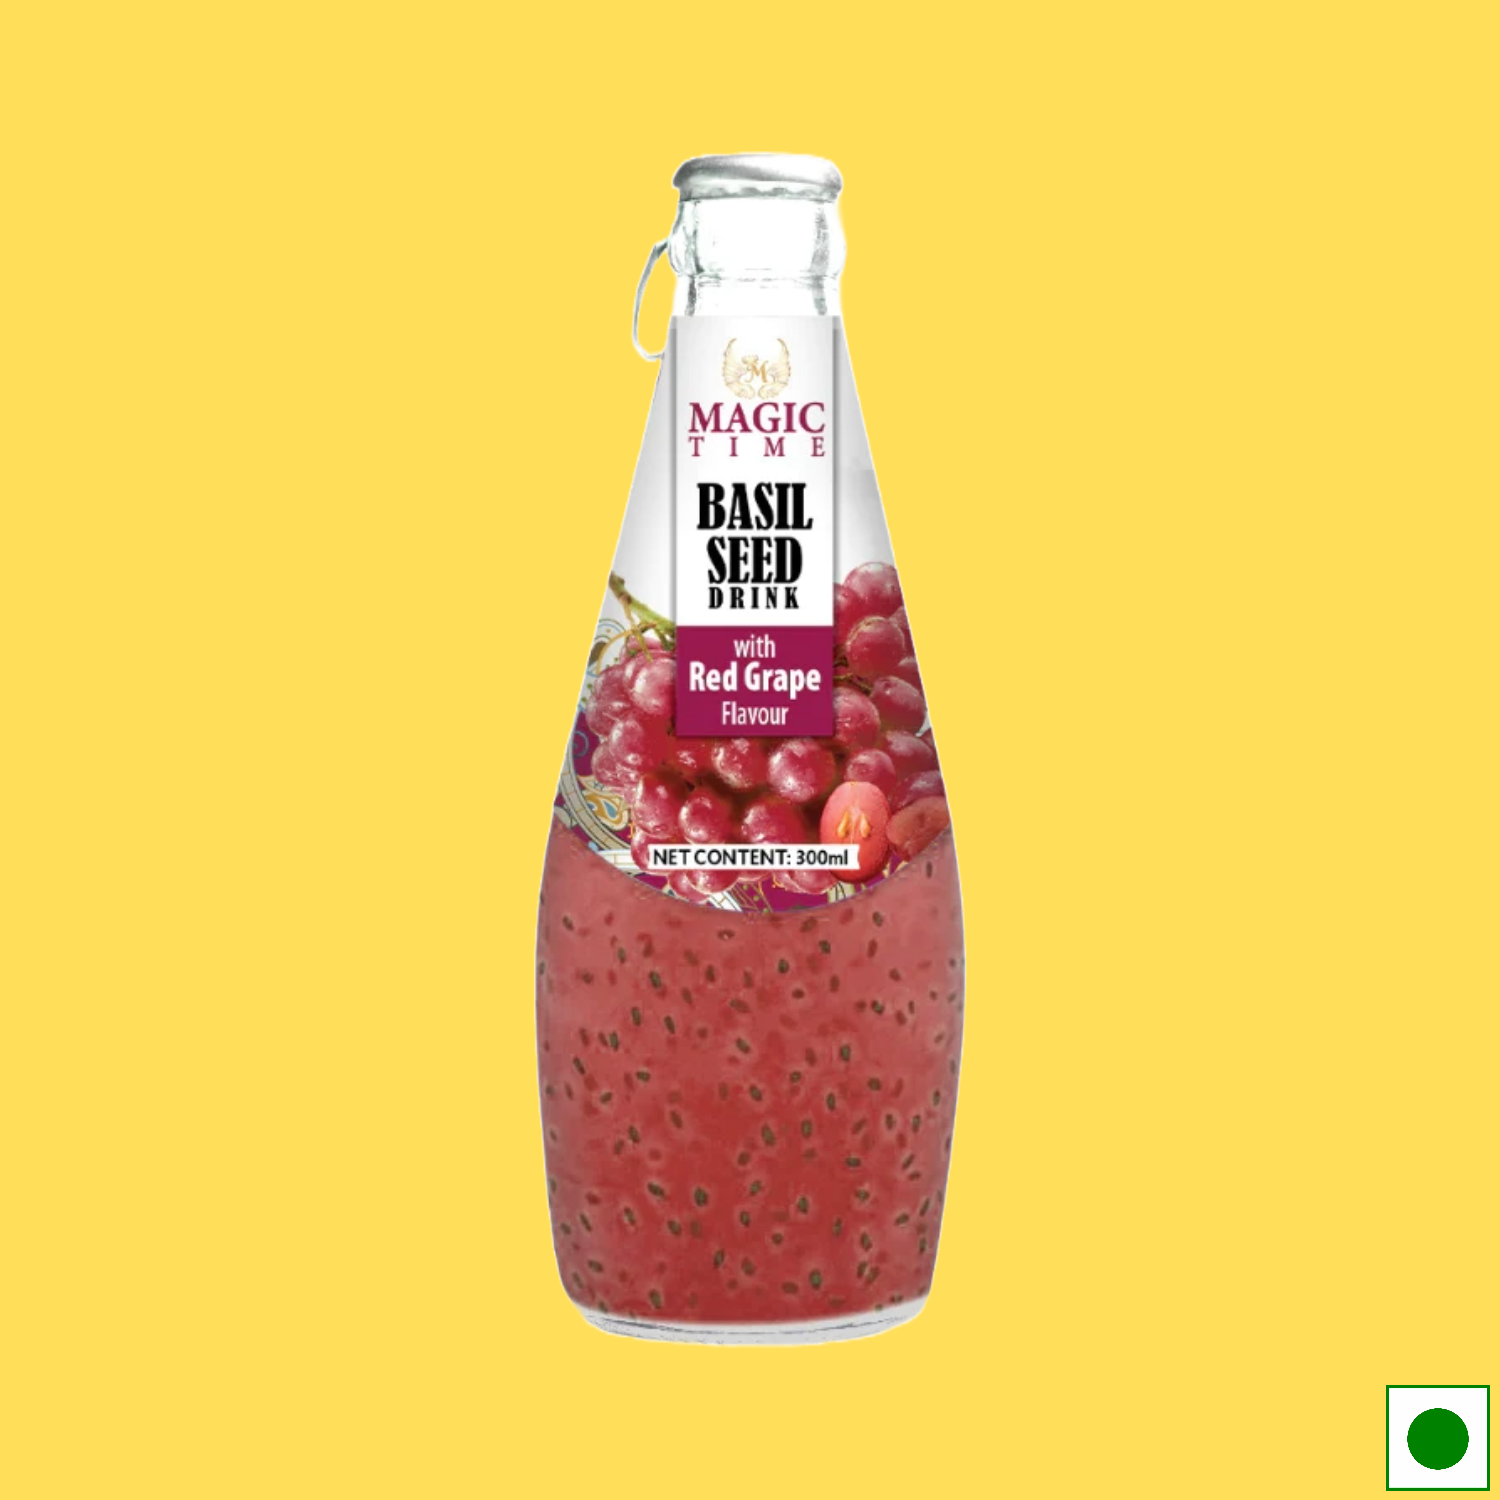 Magic Time Red Grape Flavored Basil Seed Drink, 300ml (Imported)